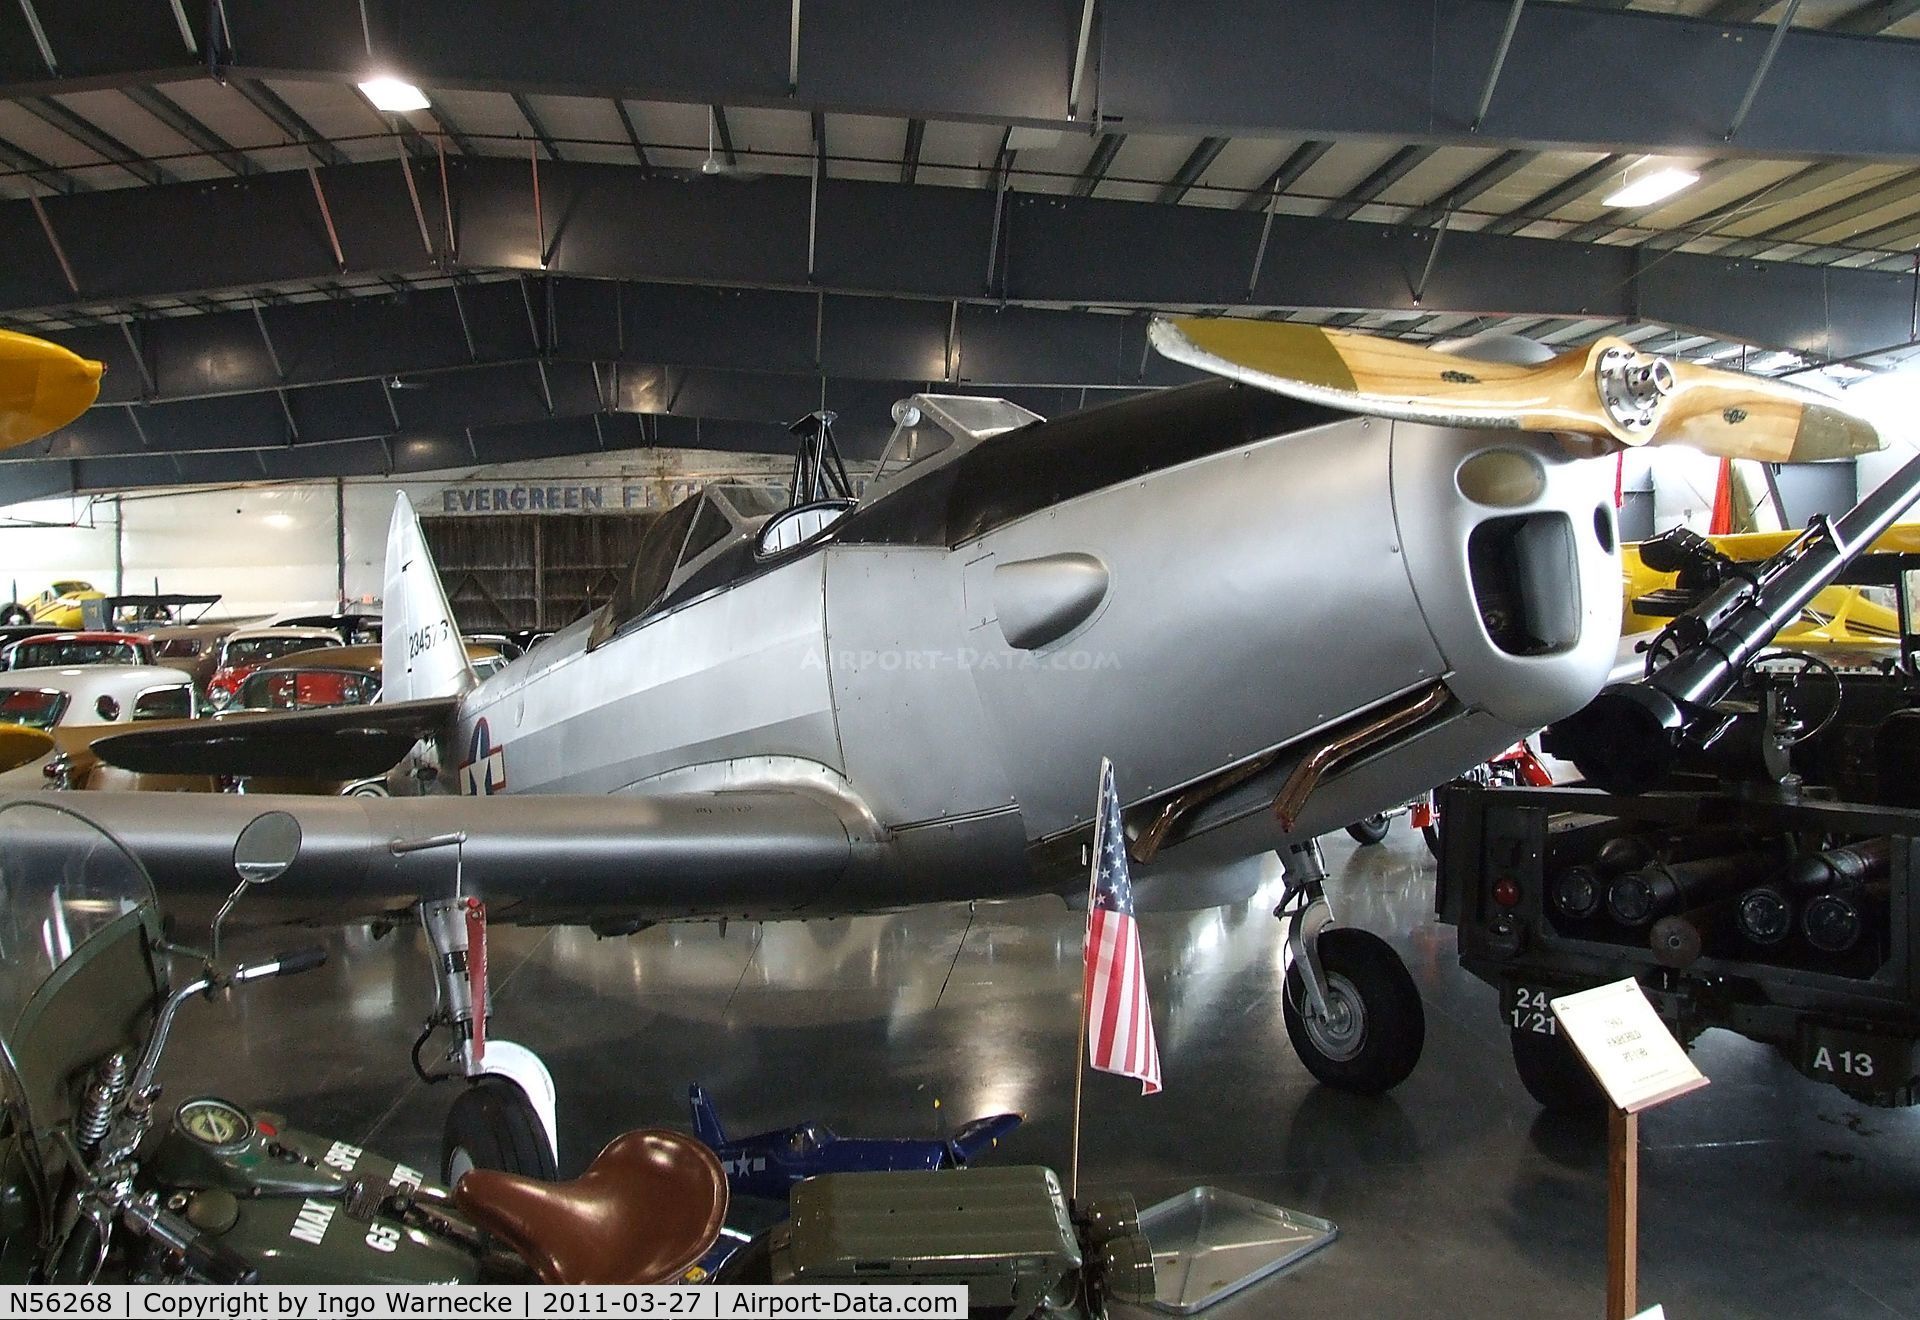 N56268, 1943 Fairchild M-62A C/N T43-5242, Fairchild M-62A (PT-19) at the Western Antique Aeroplane and Automobile Museum, Hood River OR